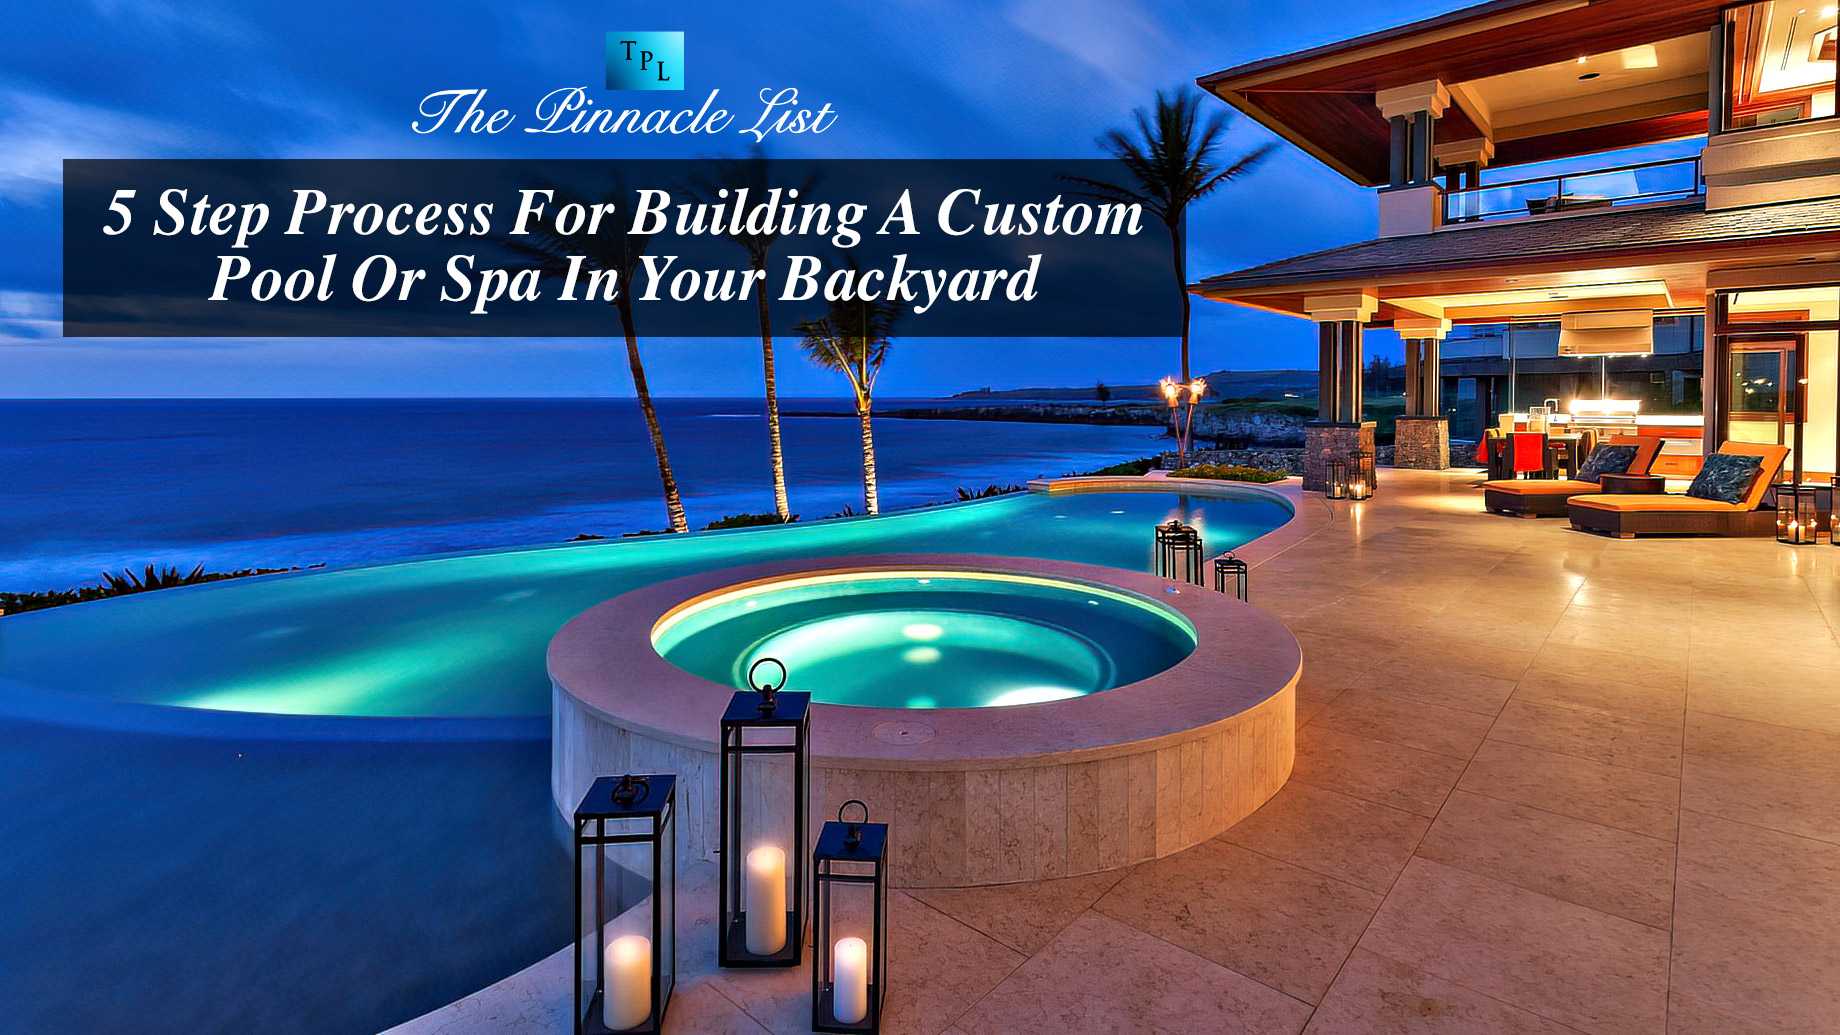 5 Step Process For Building A Custom Pool Or Spa In Your Backyard